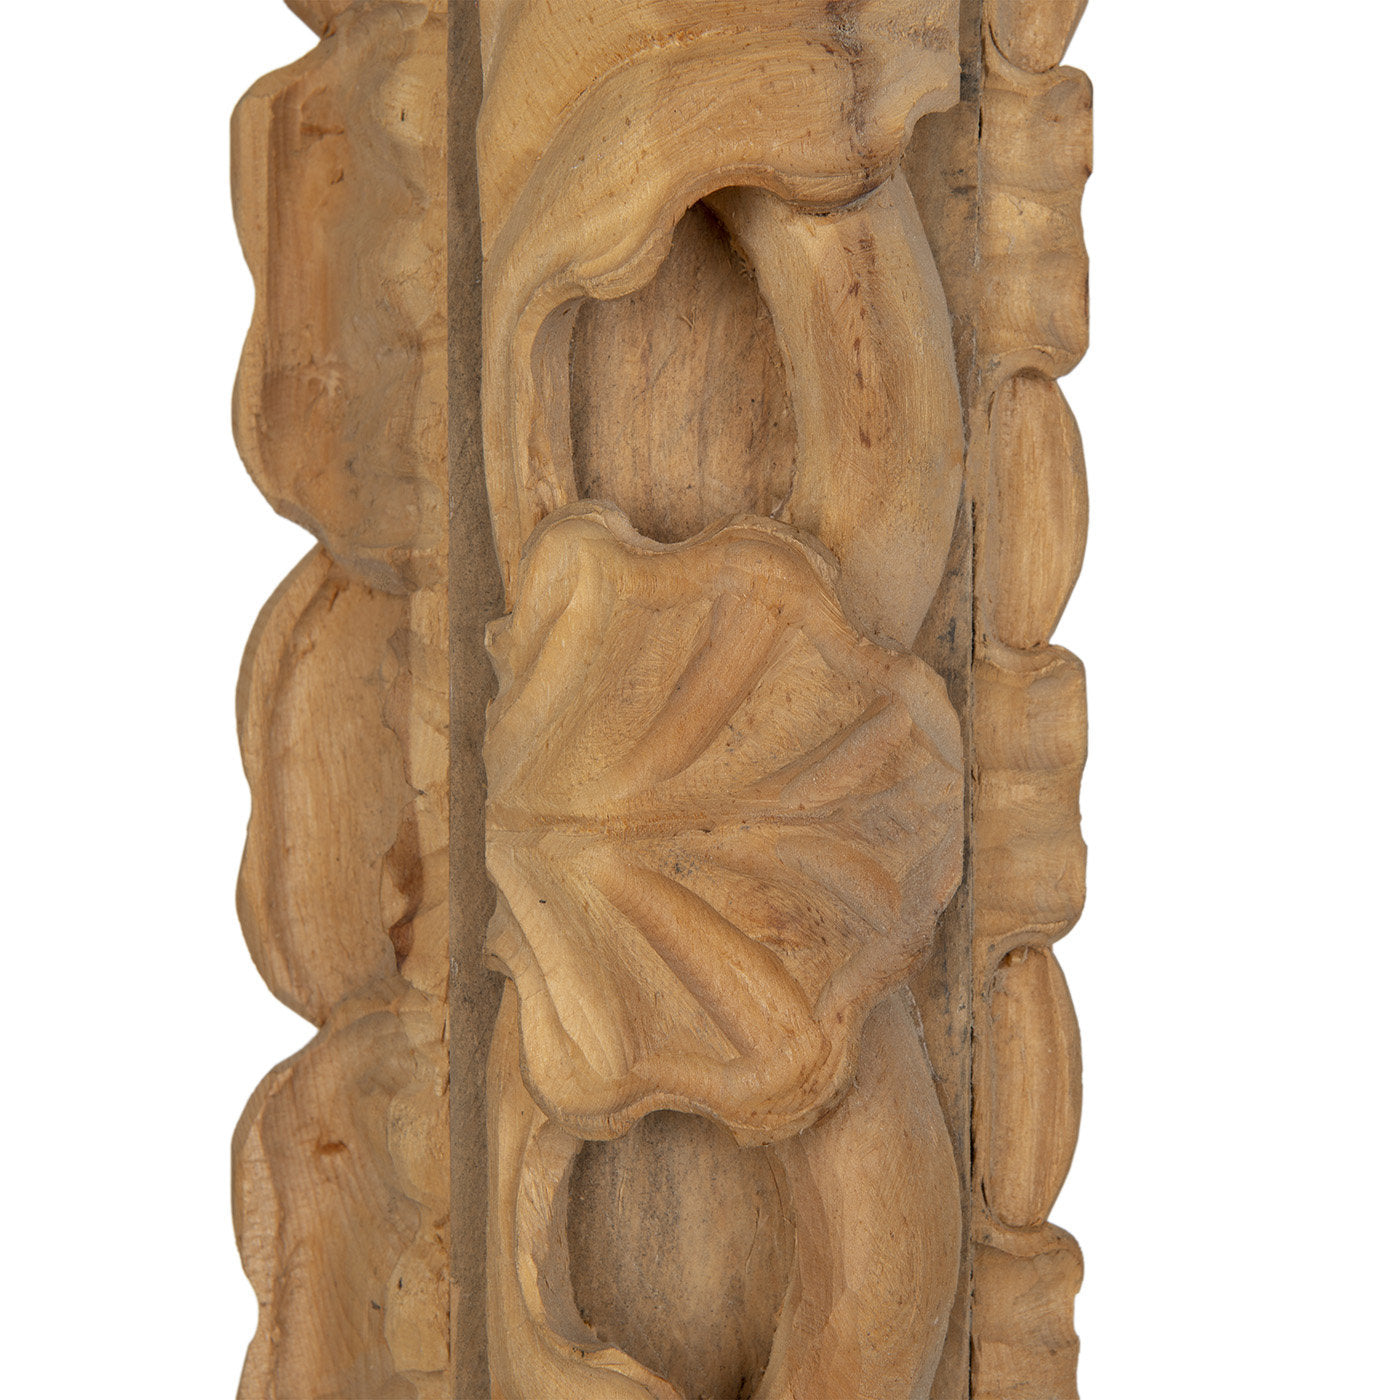 Bolognese Carved Wood Wall Mirror with Snakes - Alternative view 1